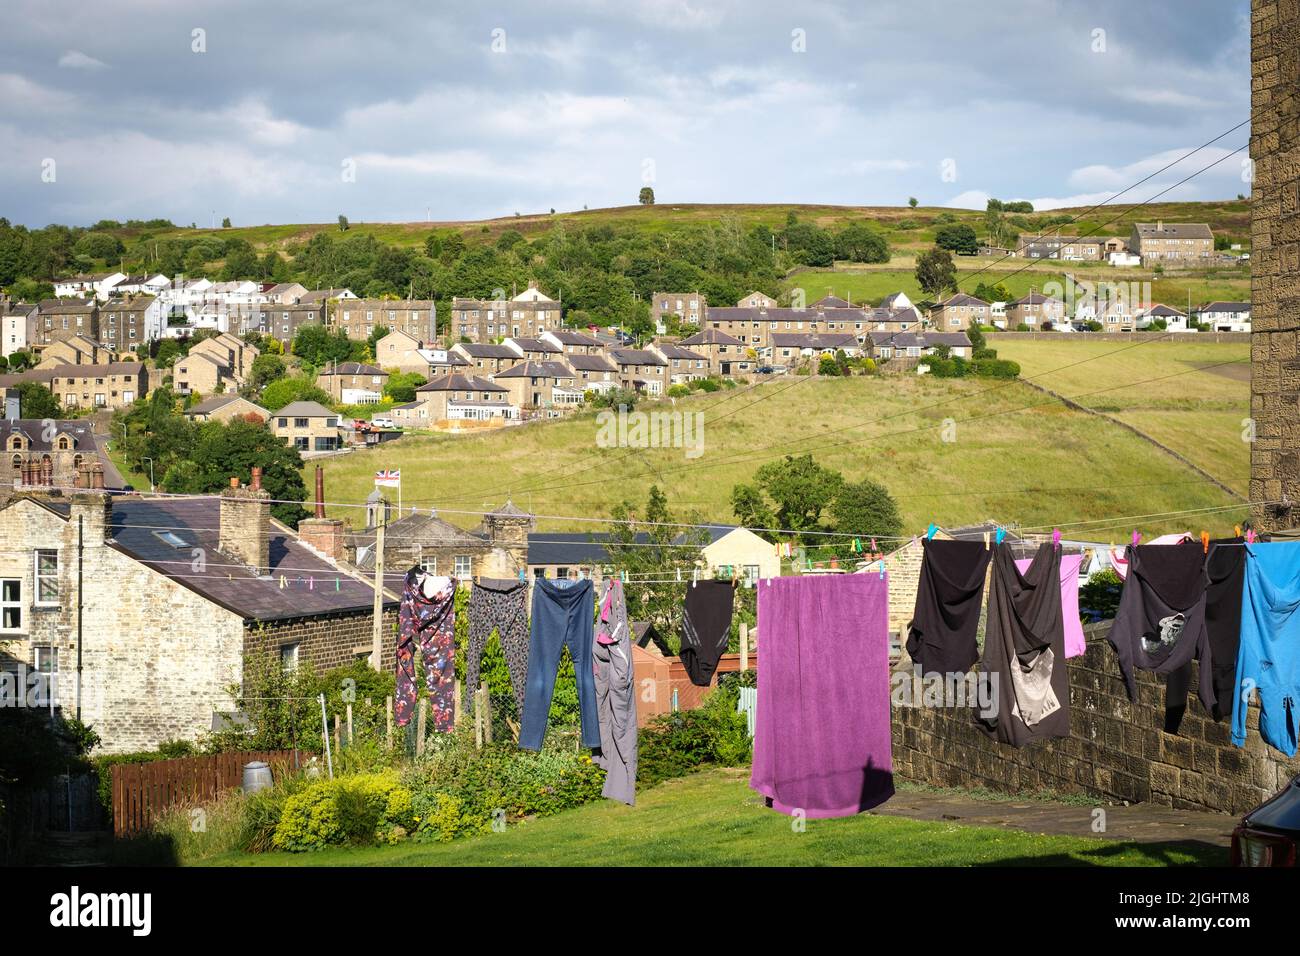 Haworth, West Yorkshire, UK. Washing hanging out to dry at Haworth. Stock Photo